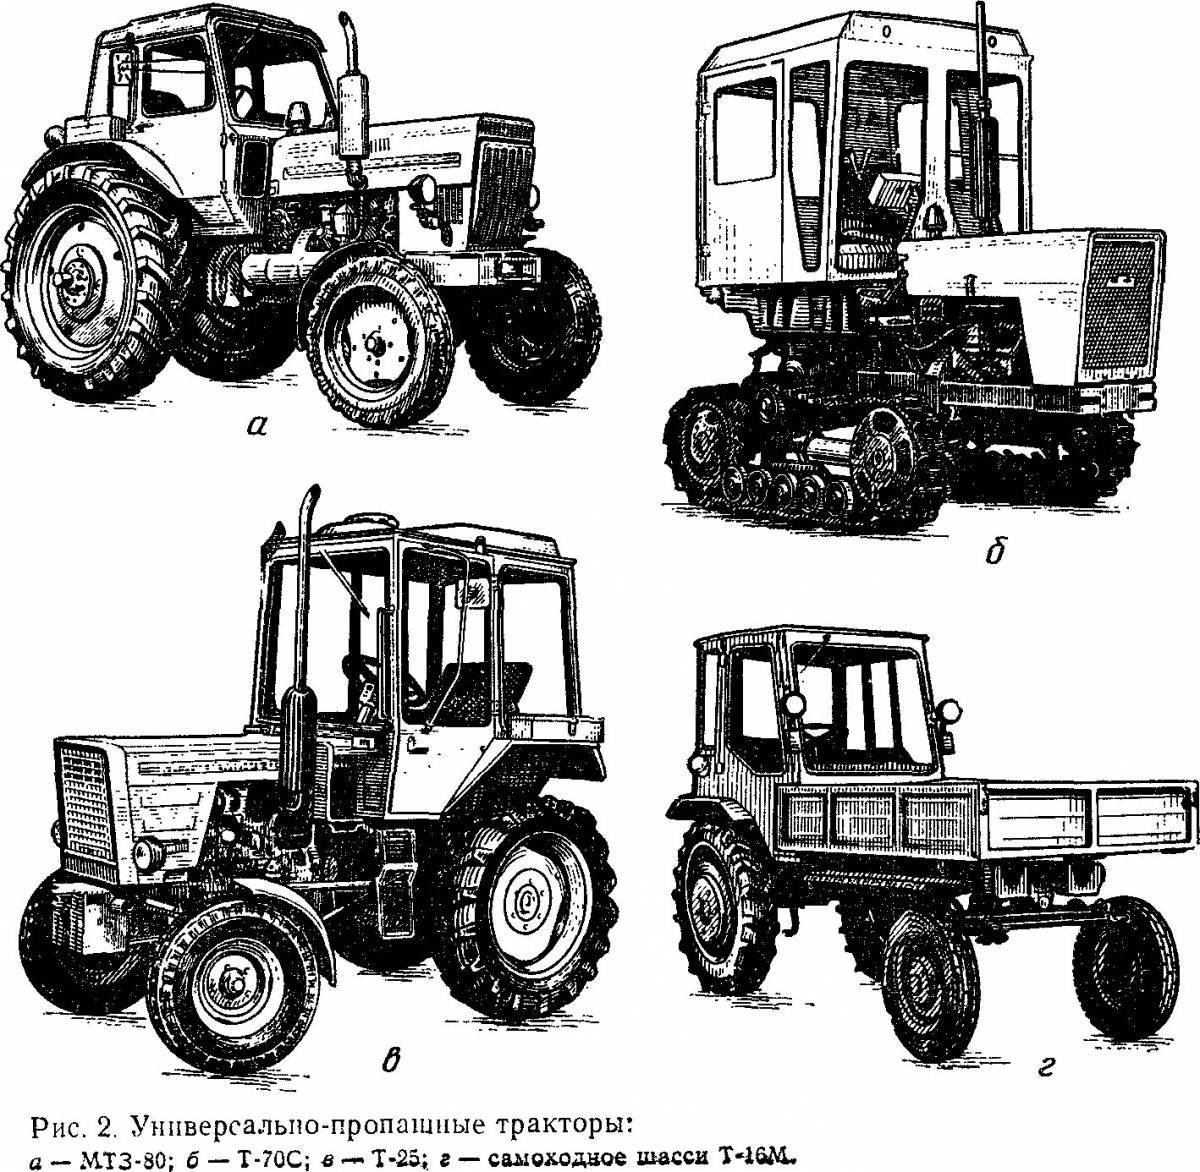 Charming tractor belarus coloring book